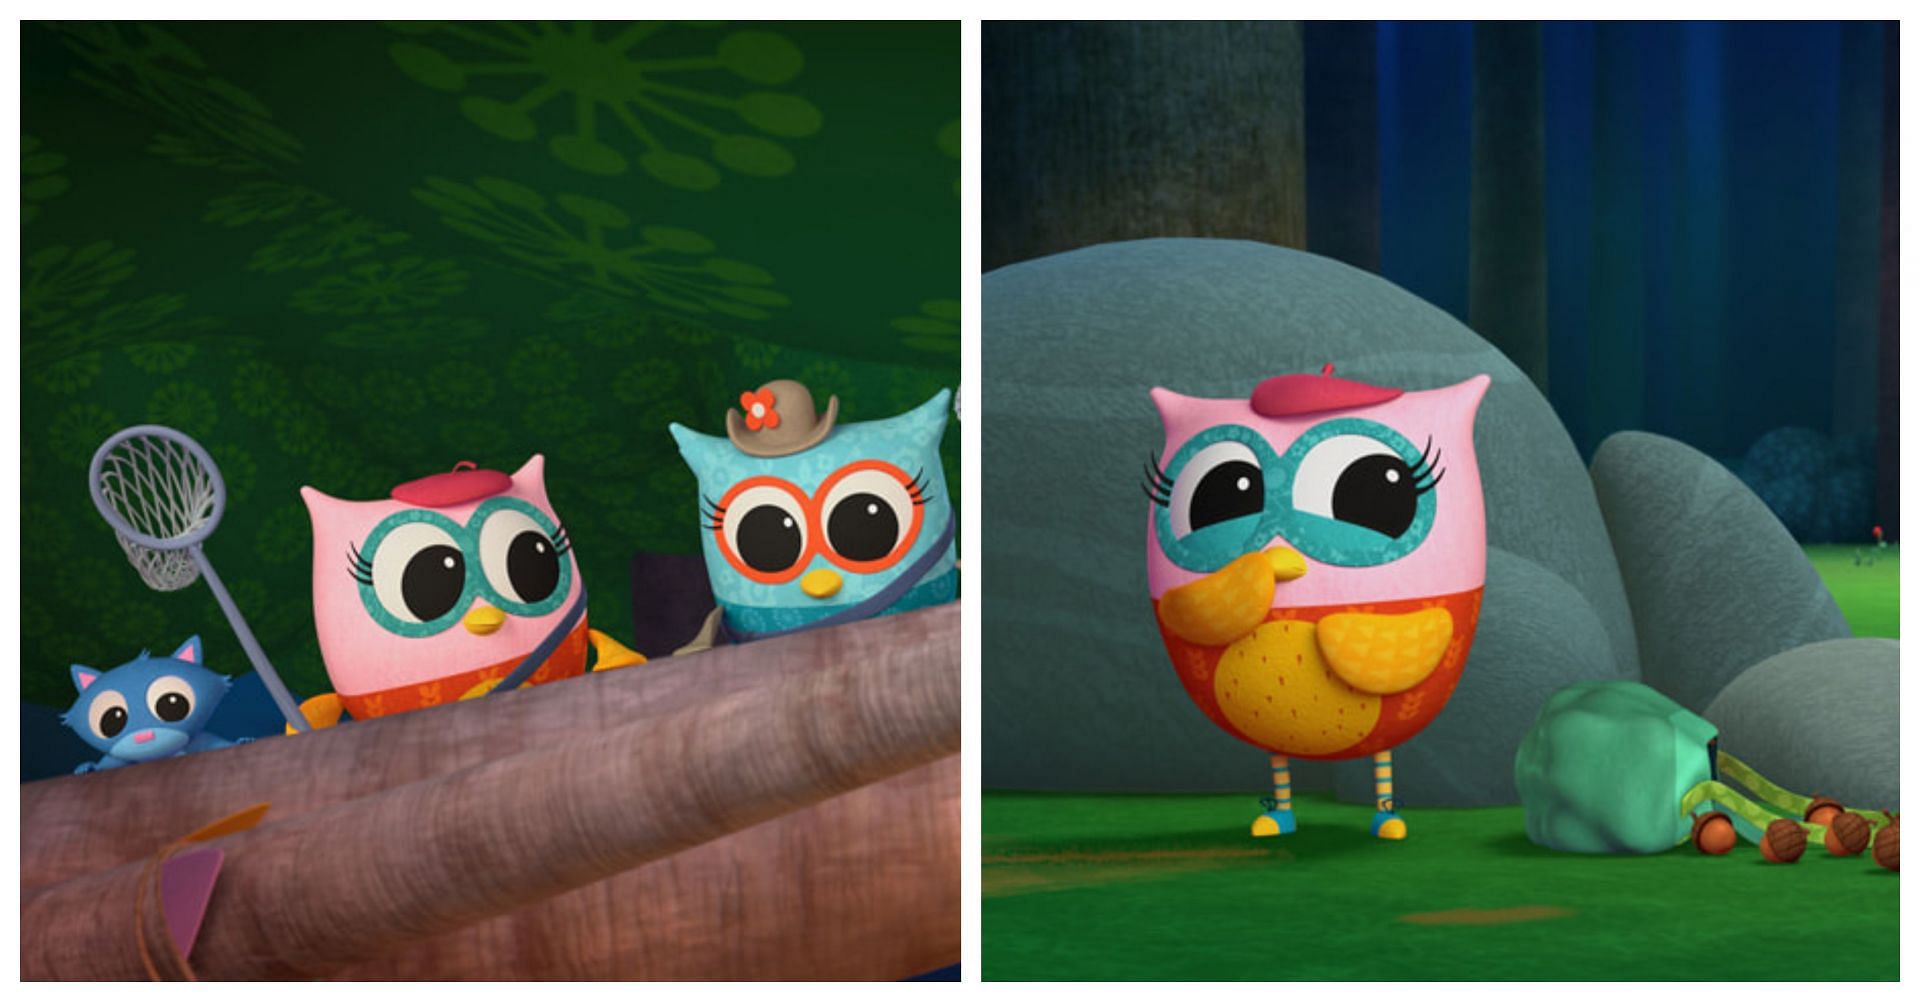 Stills from Eva the Owlet (From the Apple Press site)